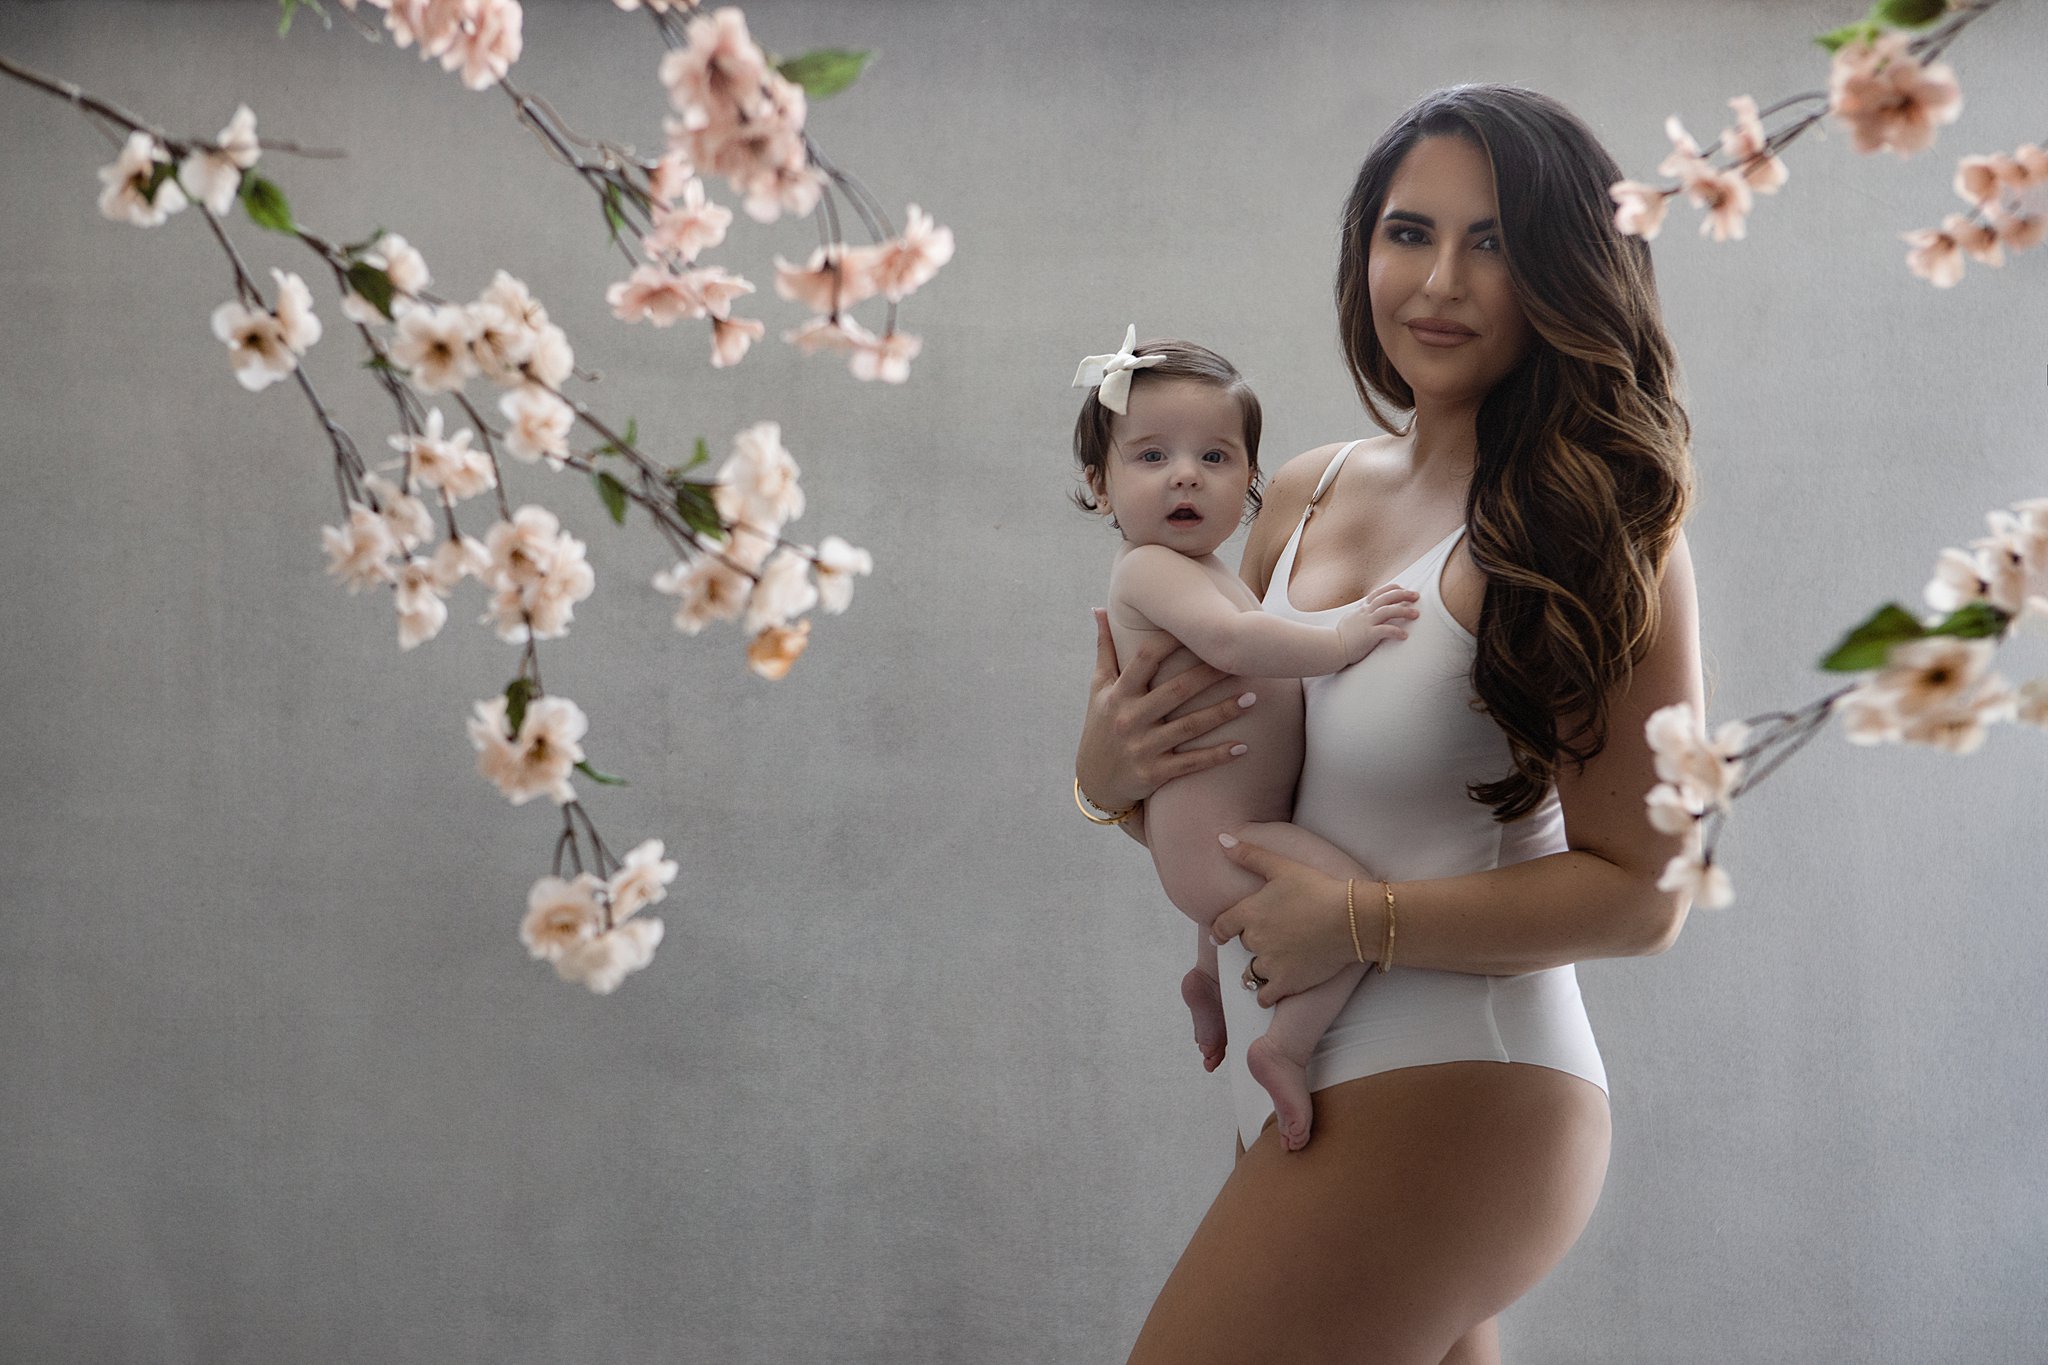 Mother in a white one-piece suit stands holding her daughter in a studio with white flowers